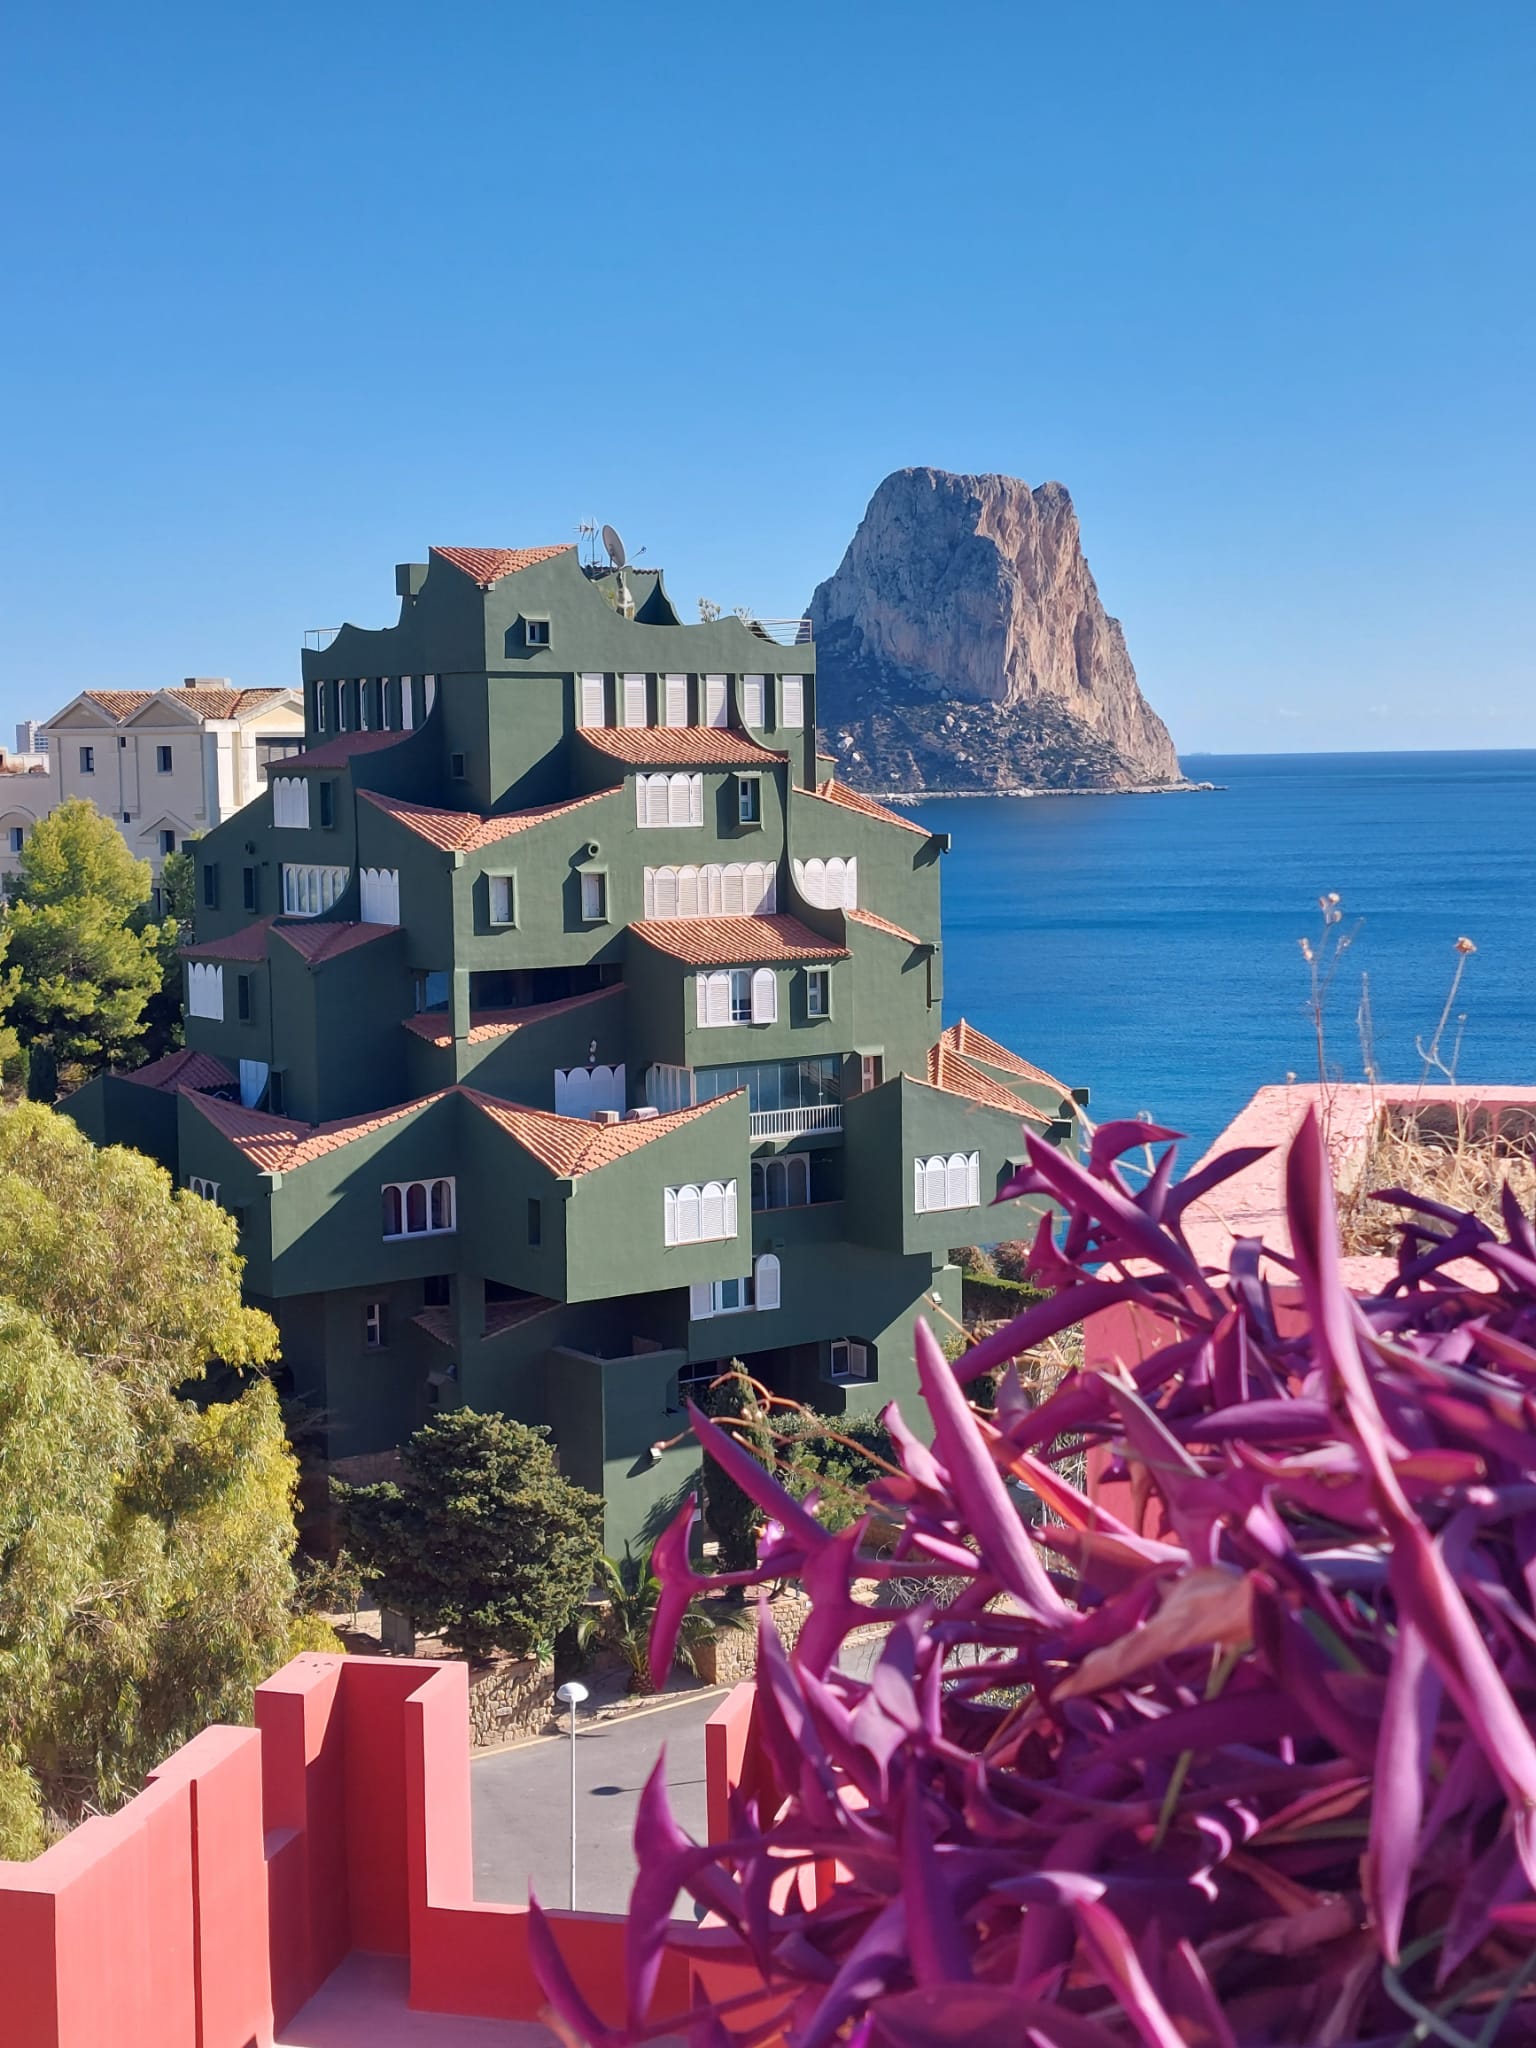 Penthouse in Muralla Roja, the best known building of Spain's famous architect RICARDO BOFILL, overlooking the sea, the Peñon de Ifach.